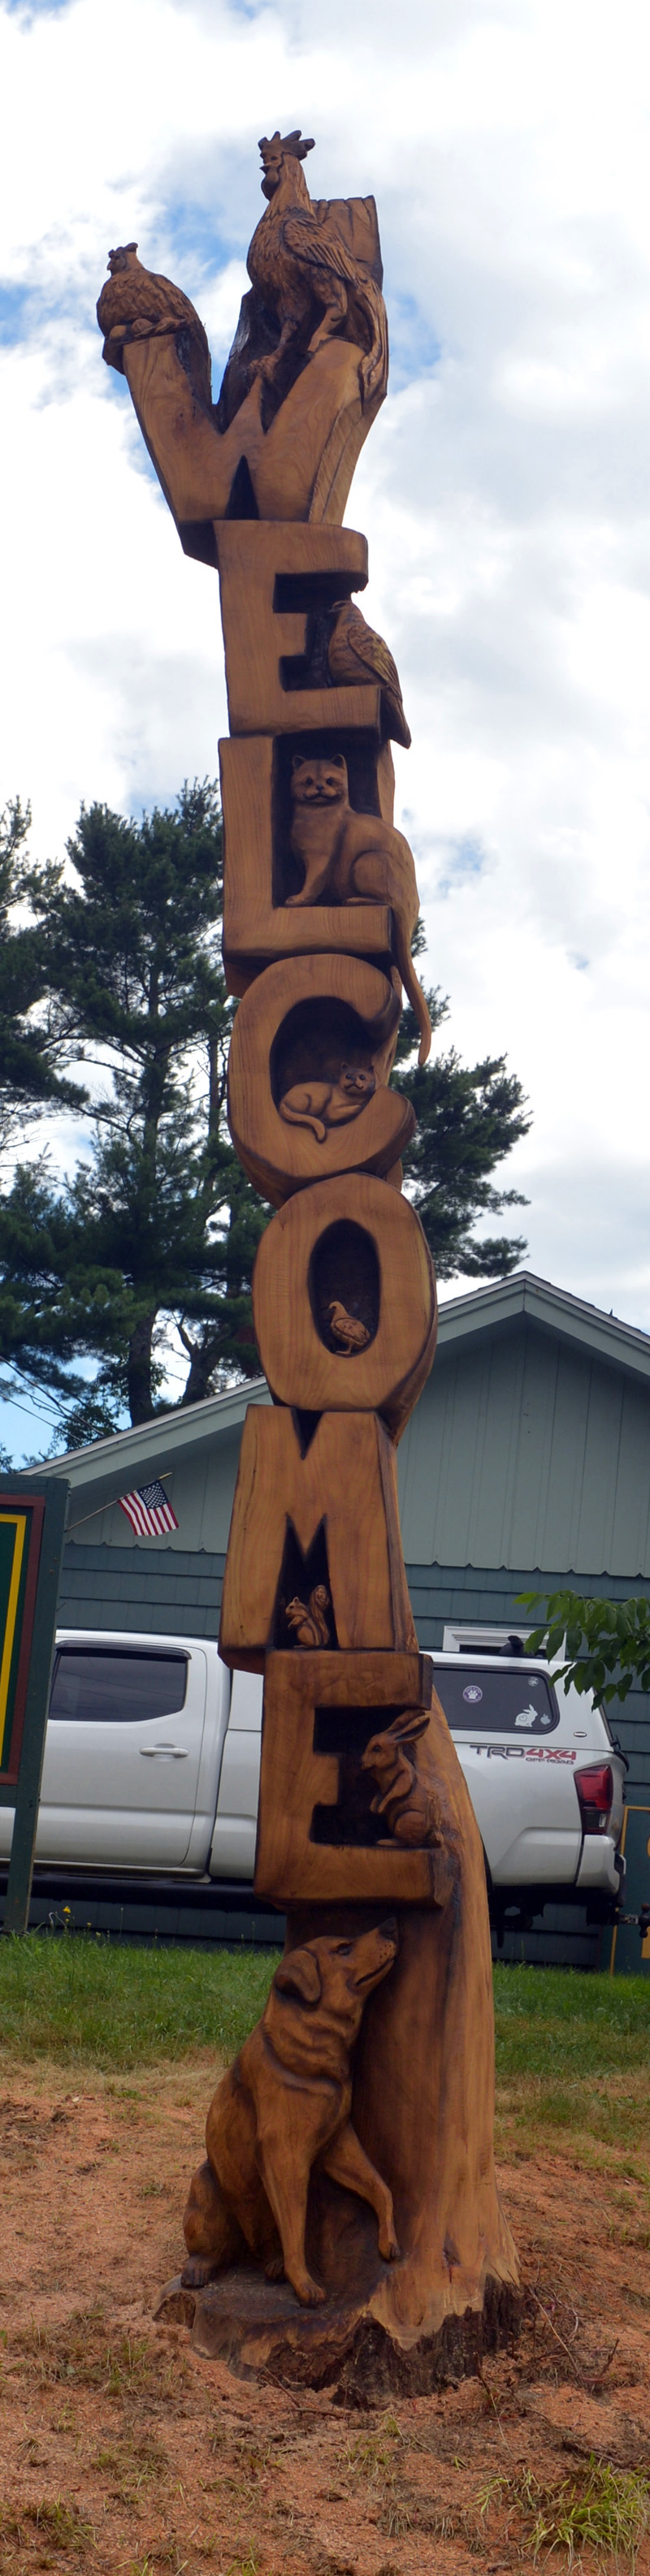 The new welcome sign at Cromwell Coastal Properties, on Route 1 in Wiscasset. When browntail moth caterpillars killed an oak tree in front of the business, owner Julie Cromwell hired Josh Landry to carve it into a sign featuring domestic animals. (Paula Roberts photo)